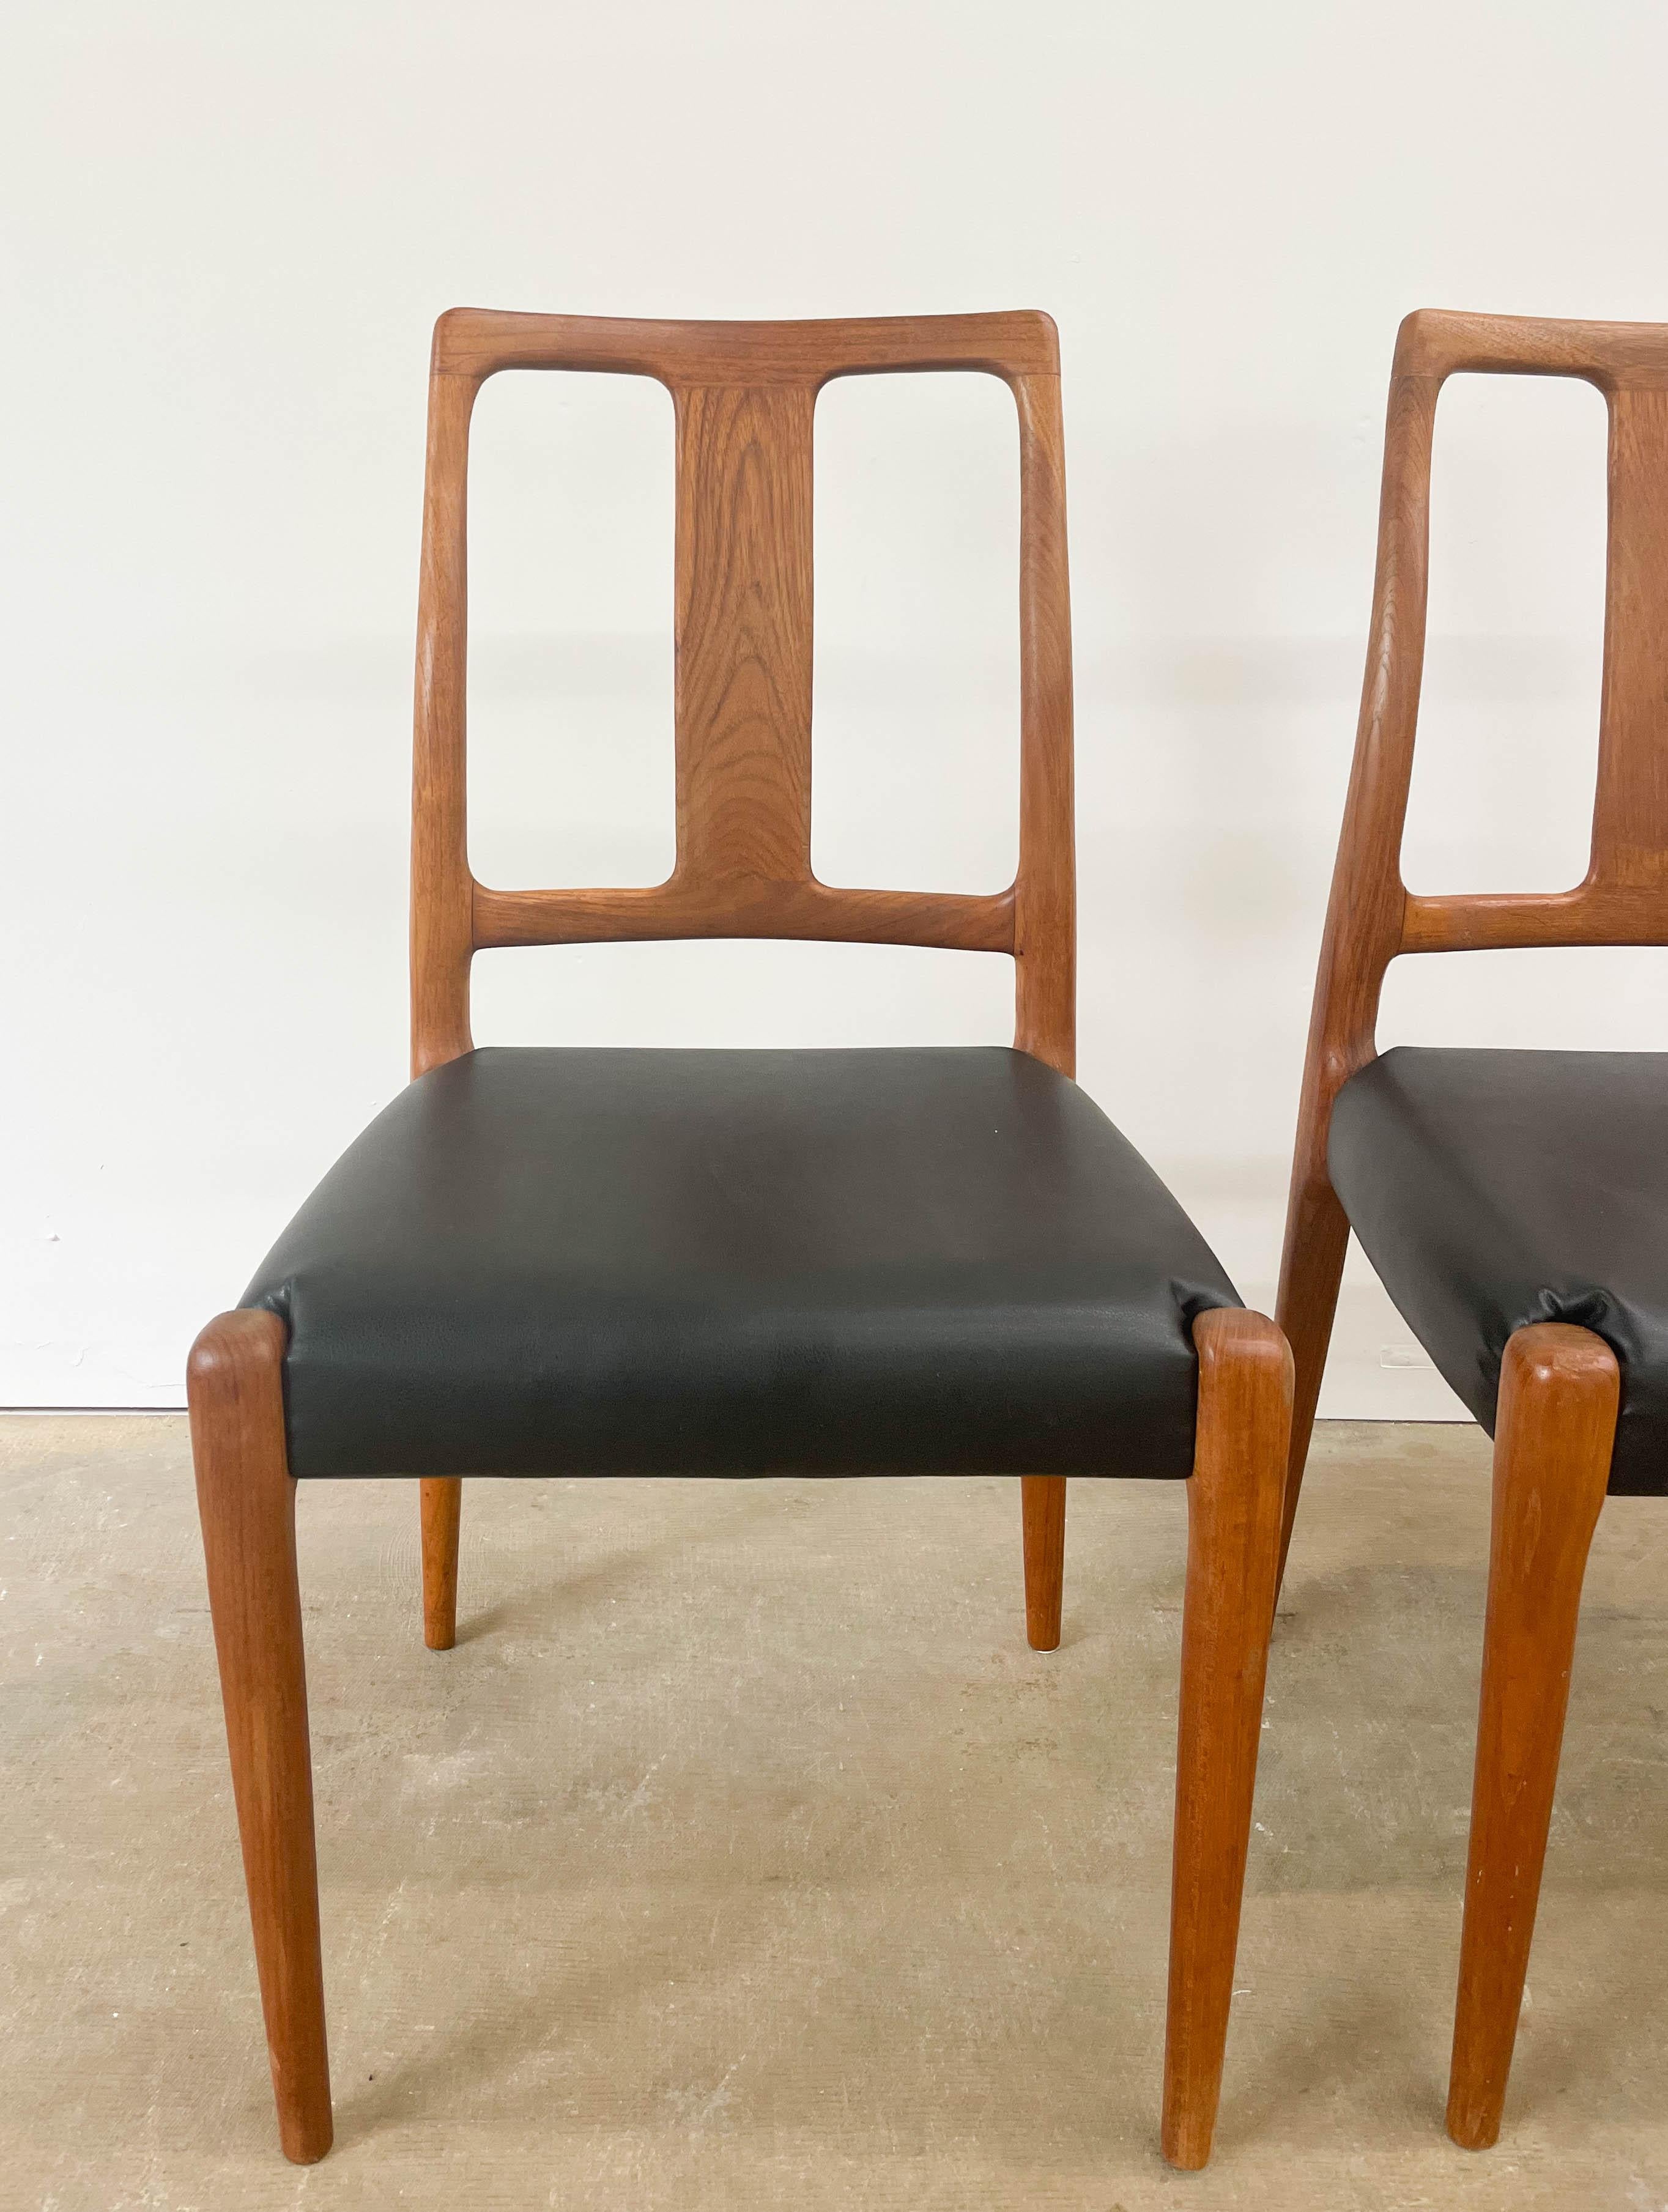 This beautiful set of D-Scan Mid-Century Modern teak dining chairs would look perfect around a dining table. Each is made from solid teak, boasts a sculptural frame, and has newly added vegan leather seats to ensure comfort for decades to come. The